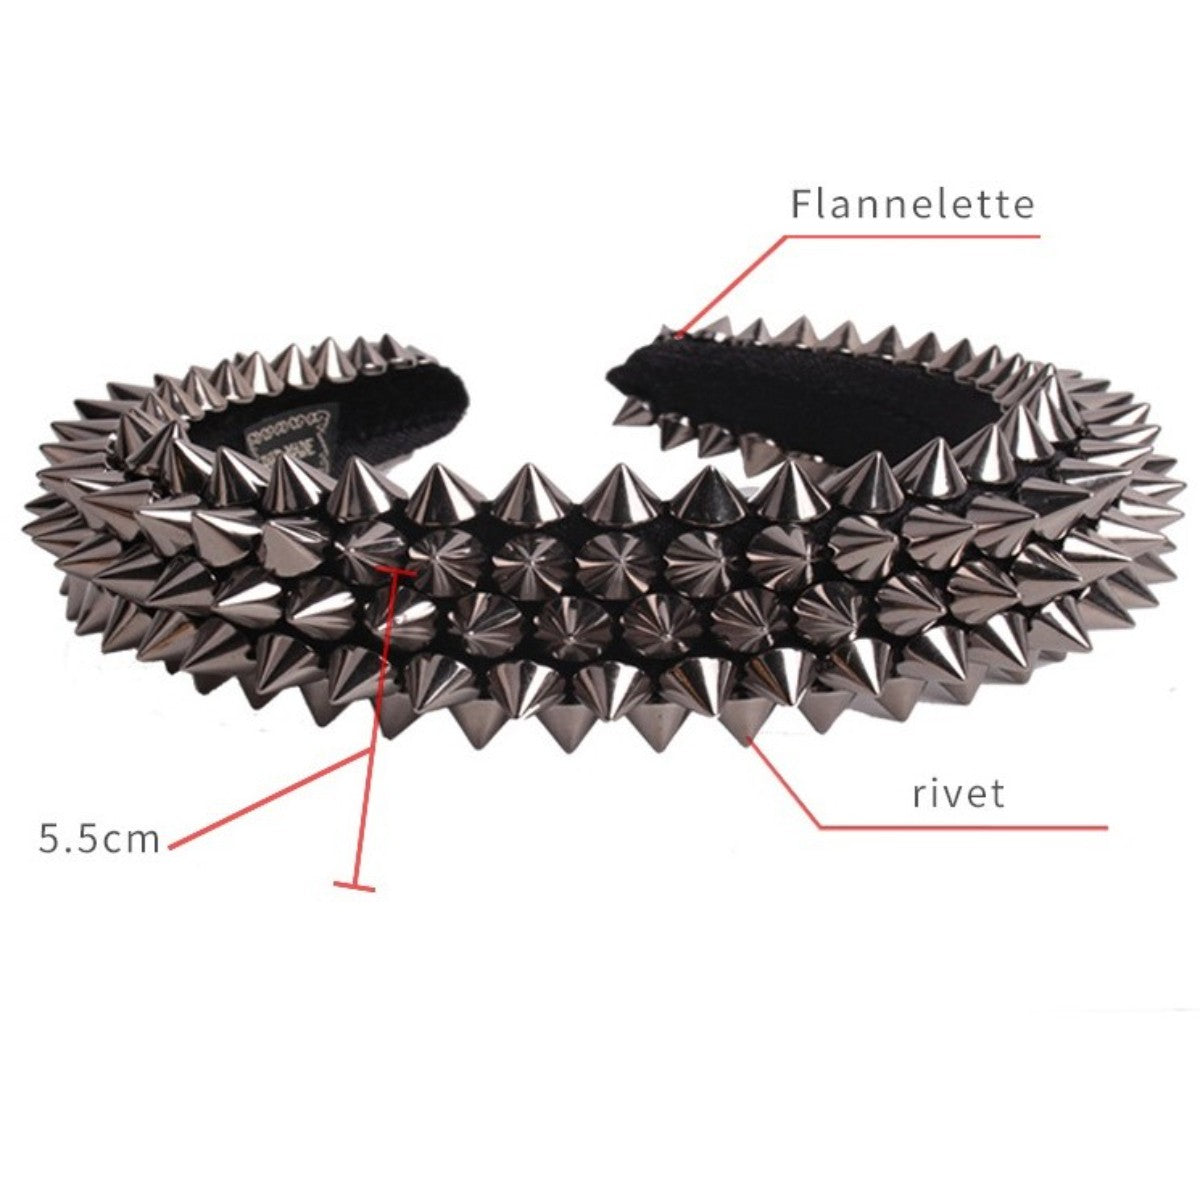 Ro Rox Punk Silver Spiked Studded Gothic Emo Hairband